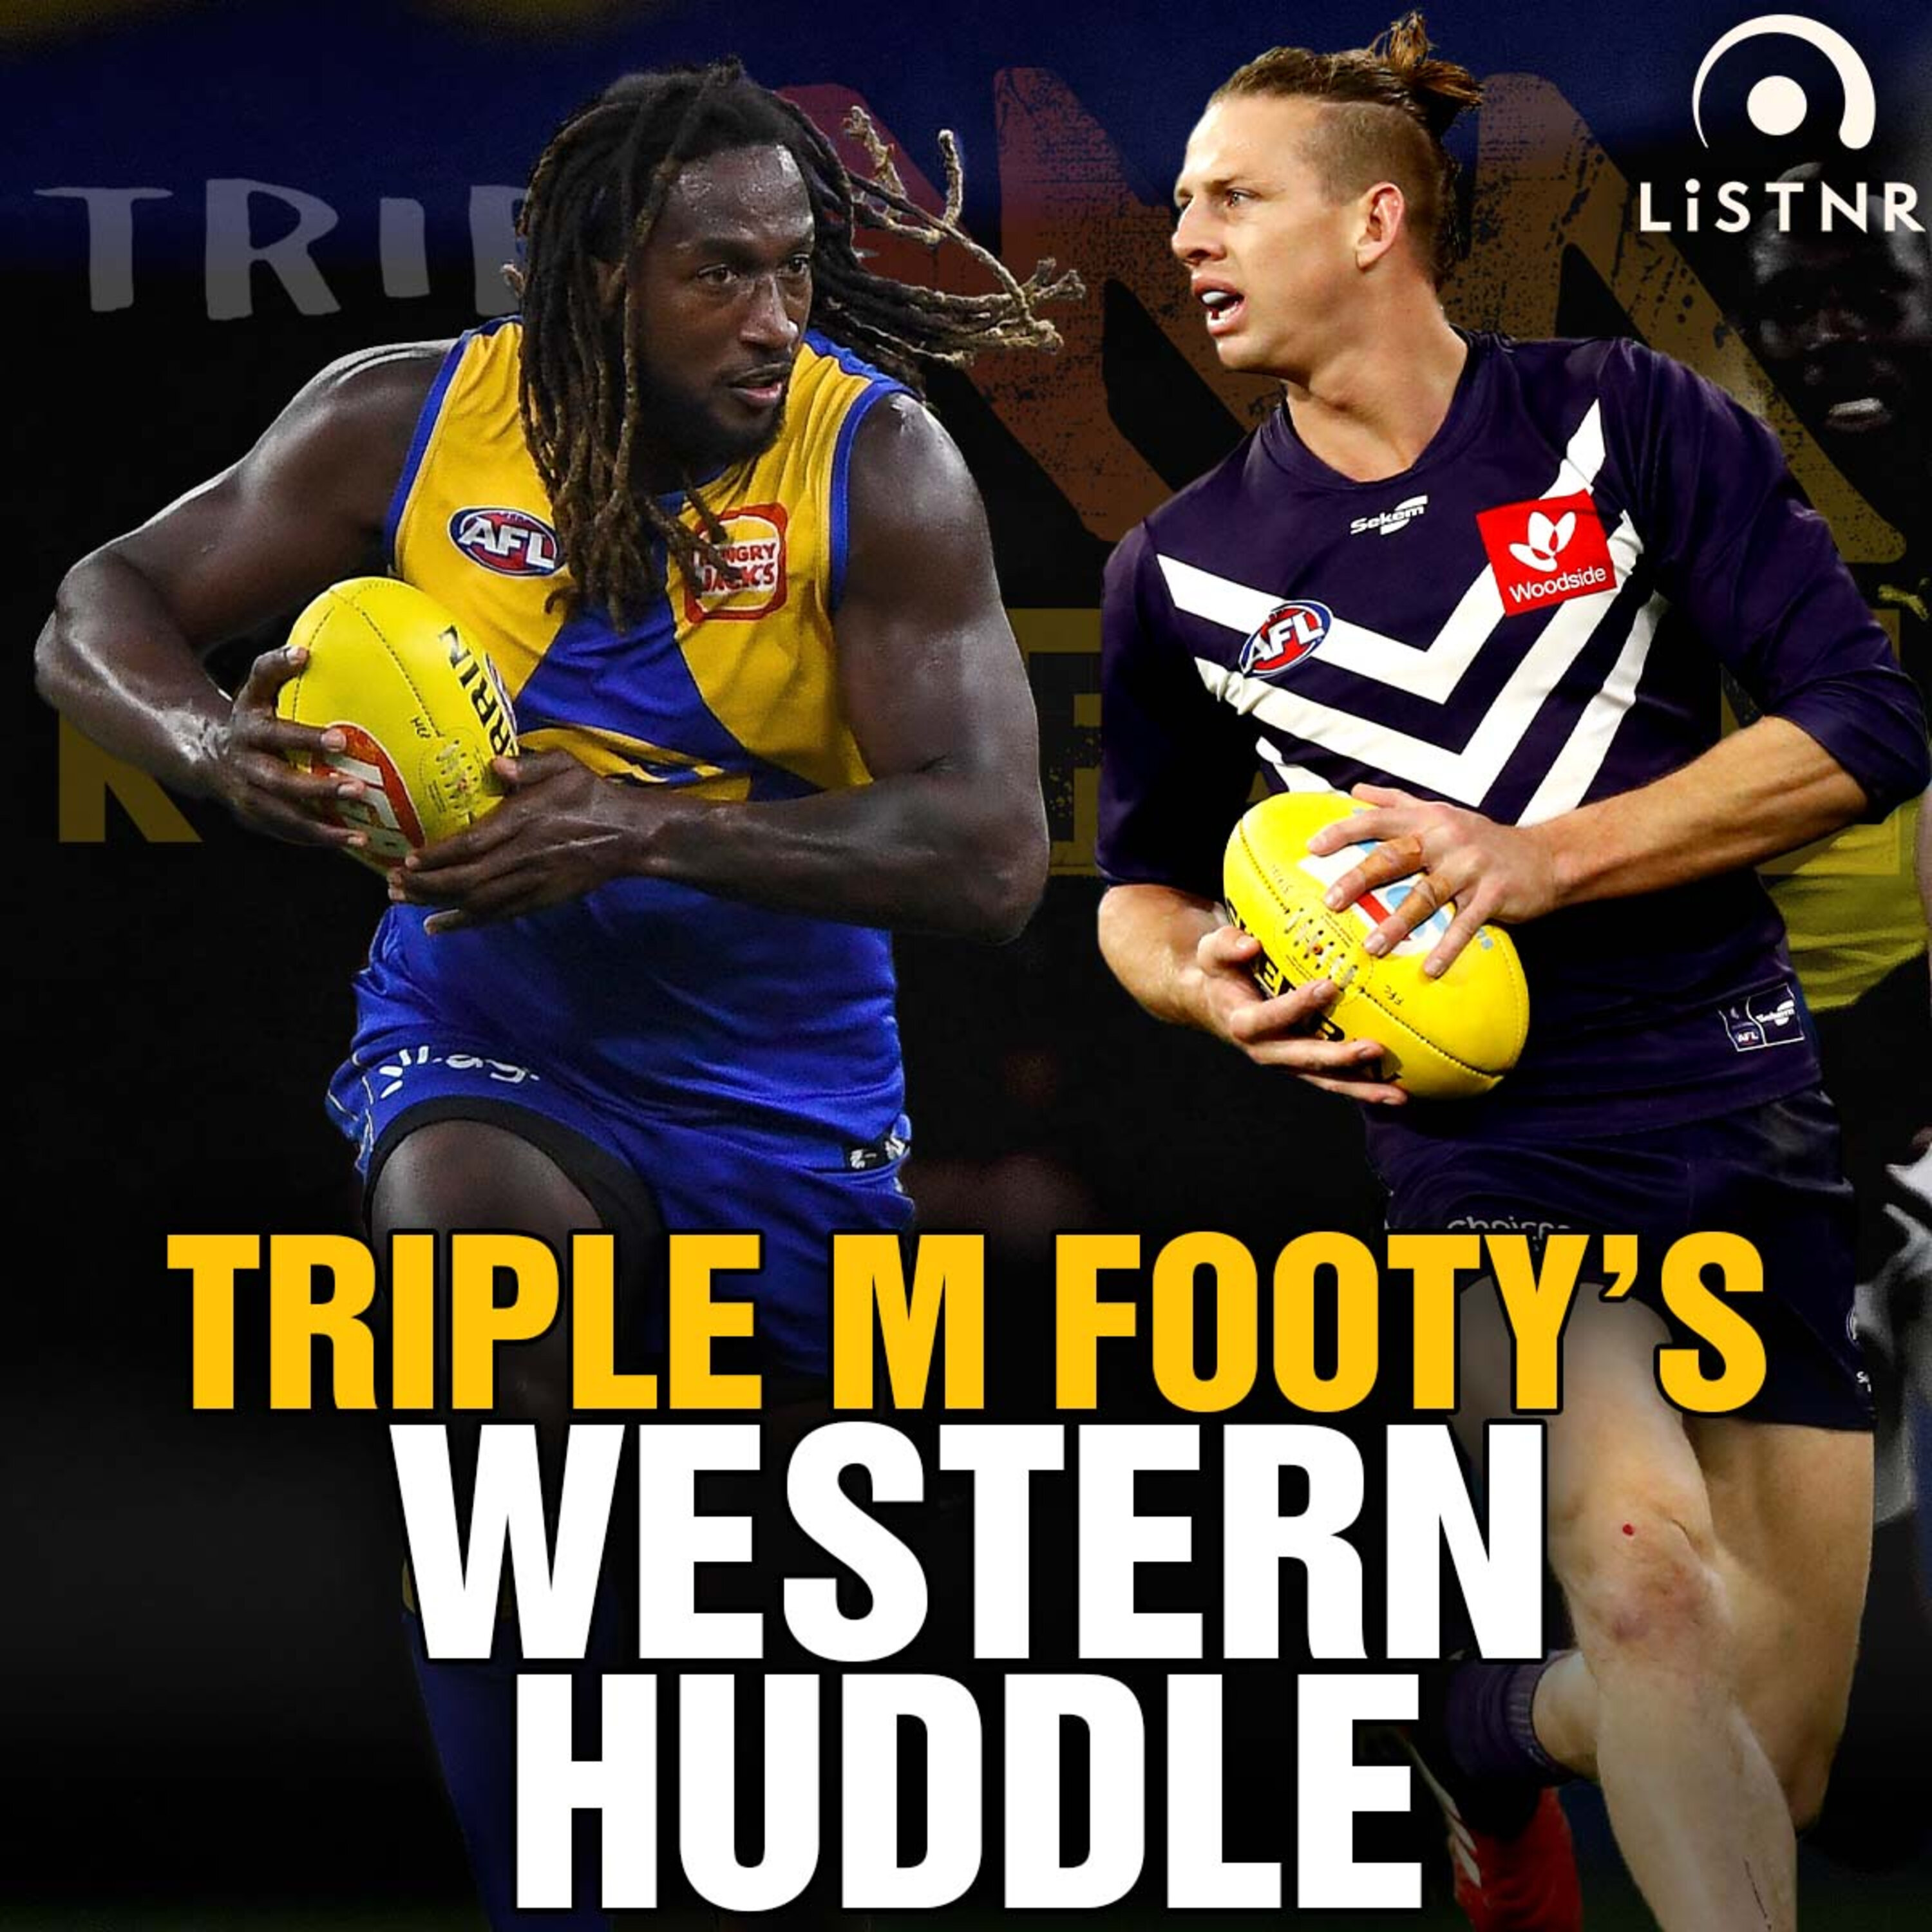 Western Huddle | Freo in cruise control, is "disgusting" too strong a word for the Eagles nightclubbers, do Melbourne take it easy on West Coast this week?